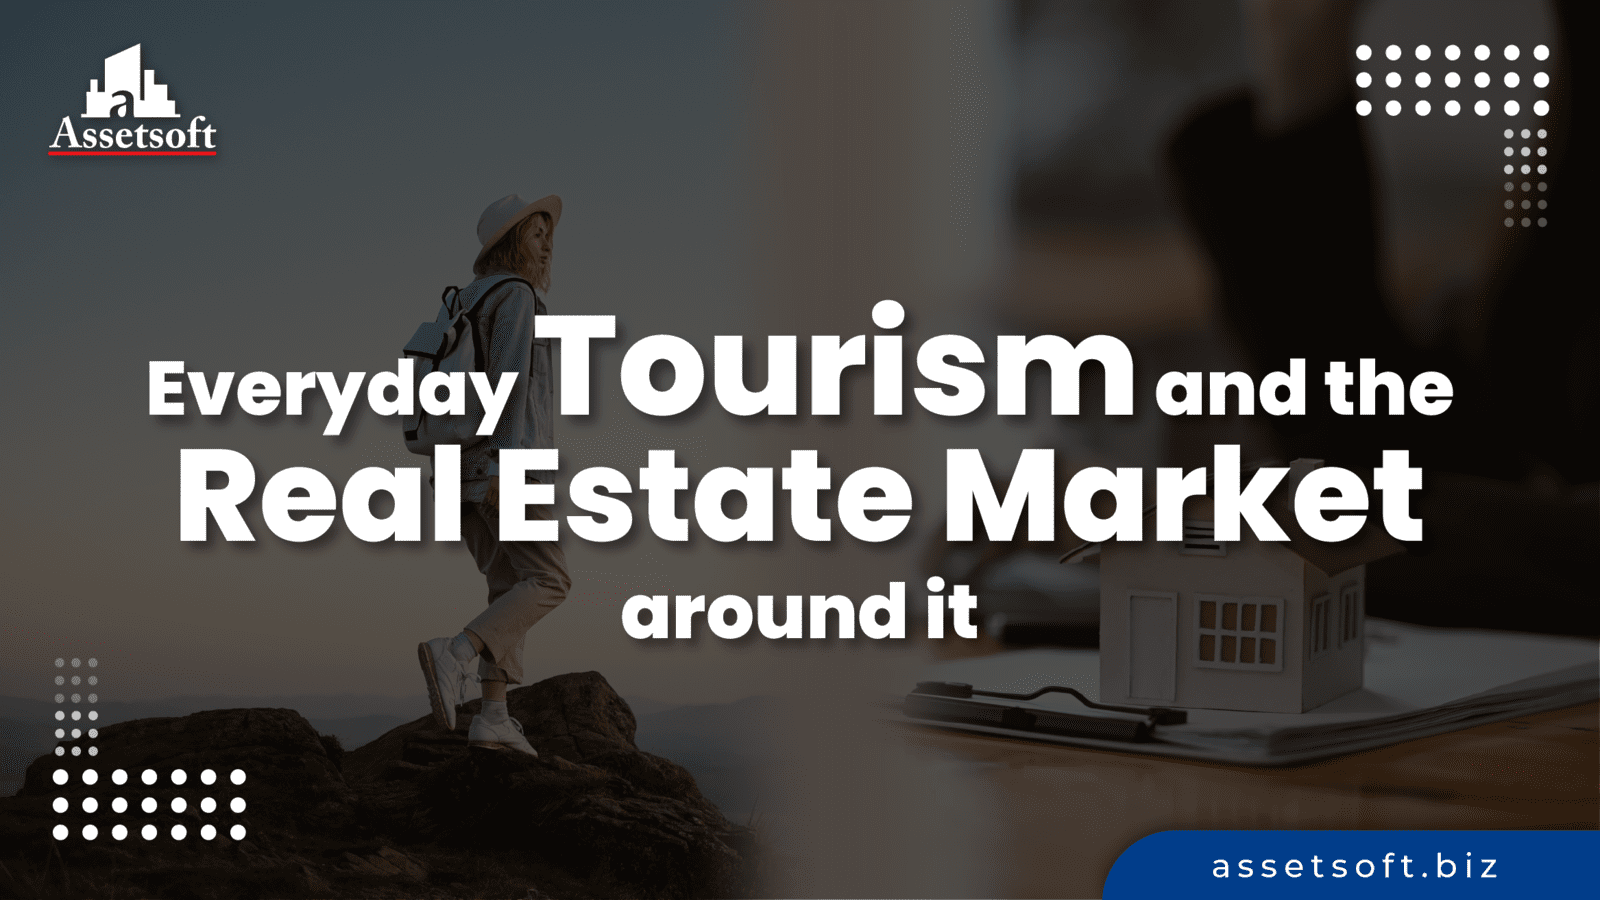 Everyday Tourism and the Real Estate Market around it r your post title